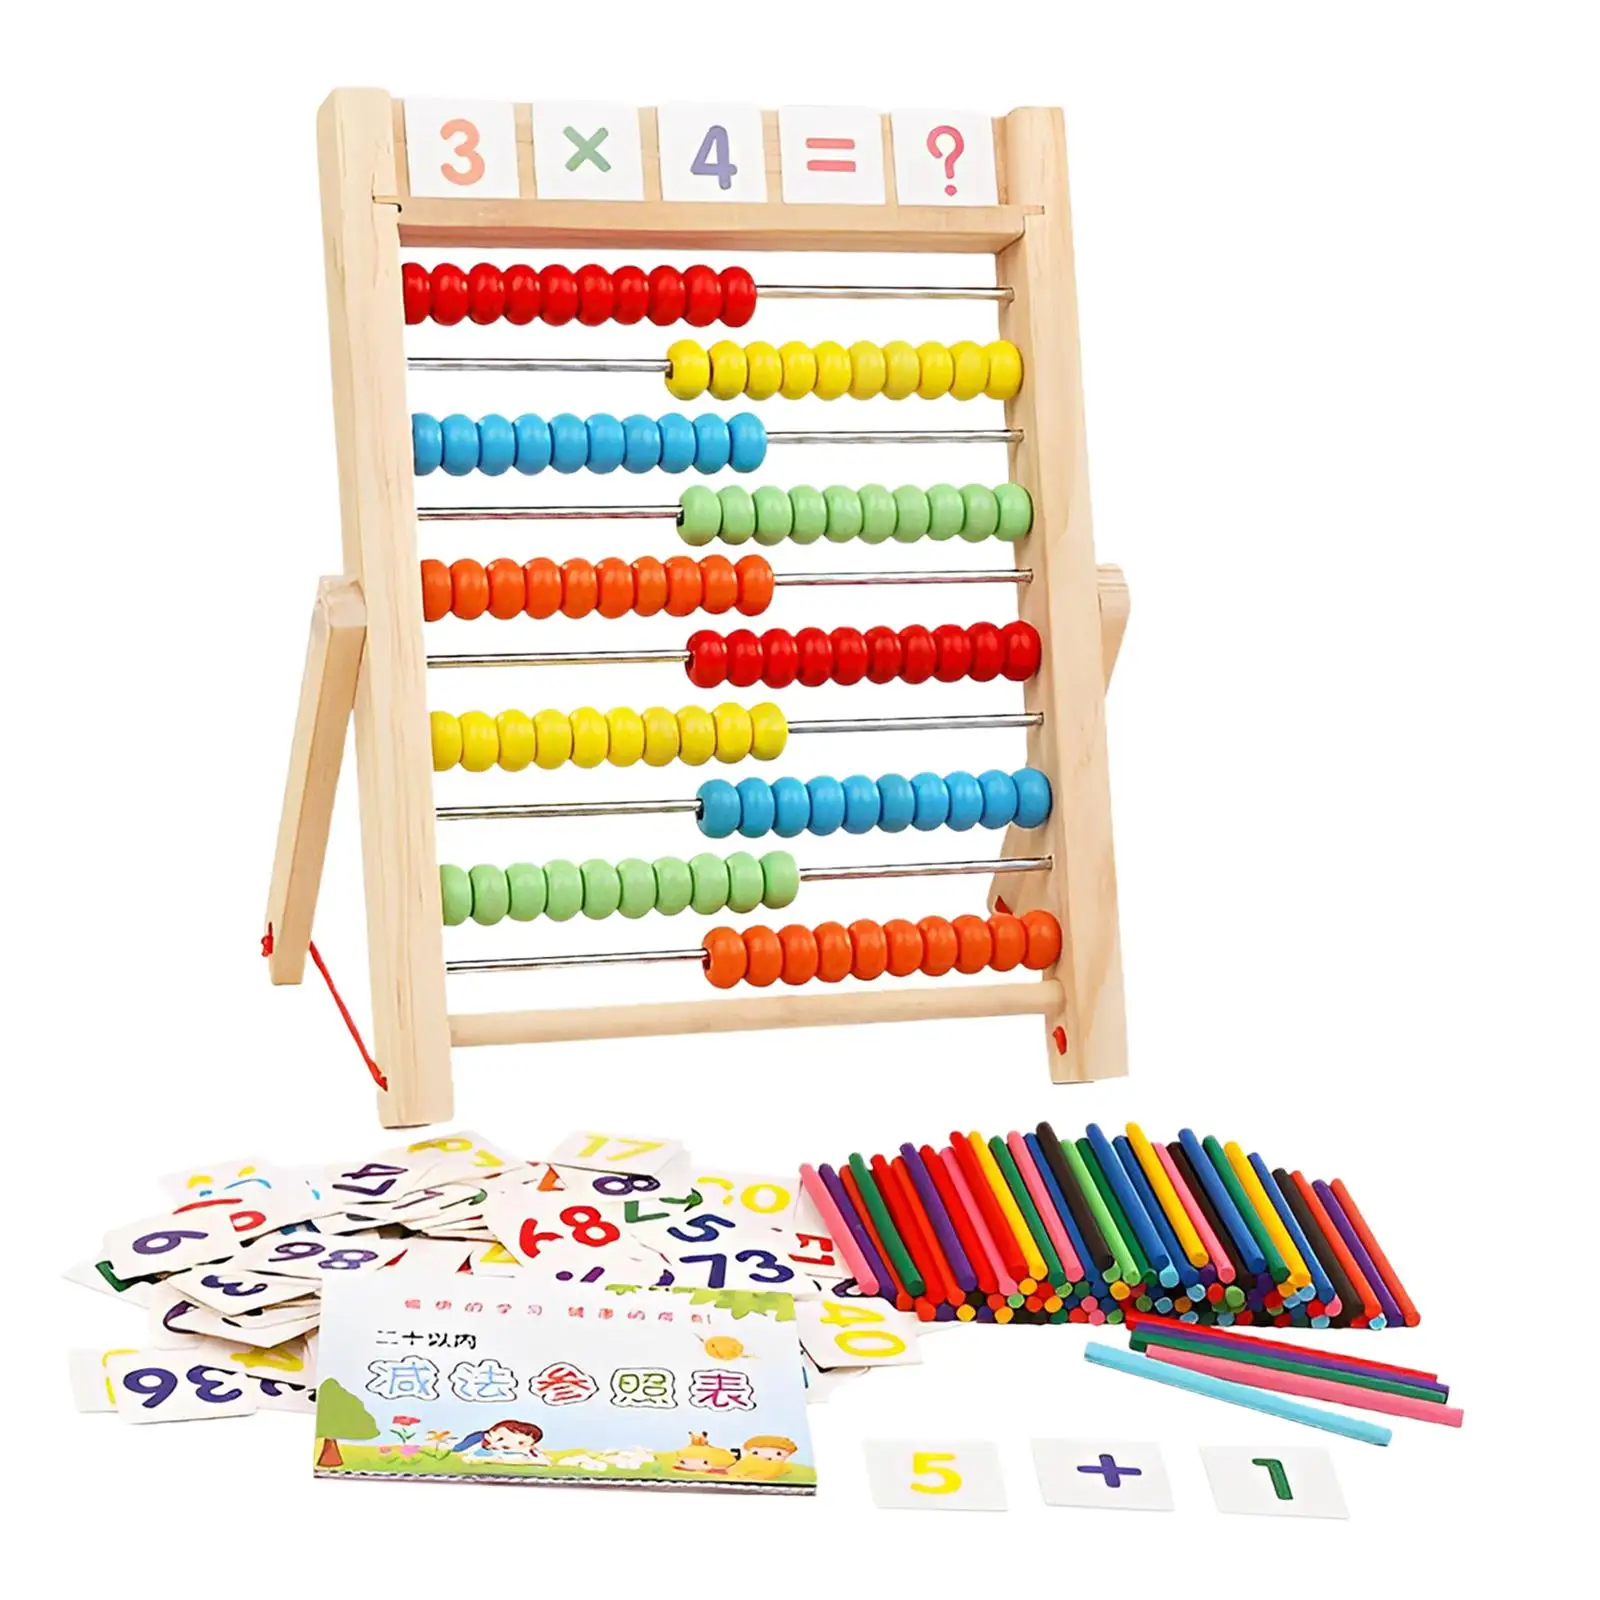 Colorful Wooden Abacus Number Learning Educational Counting Frames Toy Math Manipulatives for Toddlers Preschool Kids Boys Girls